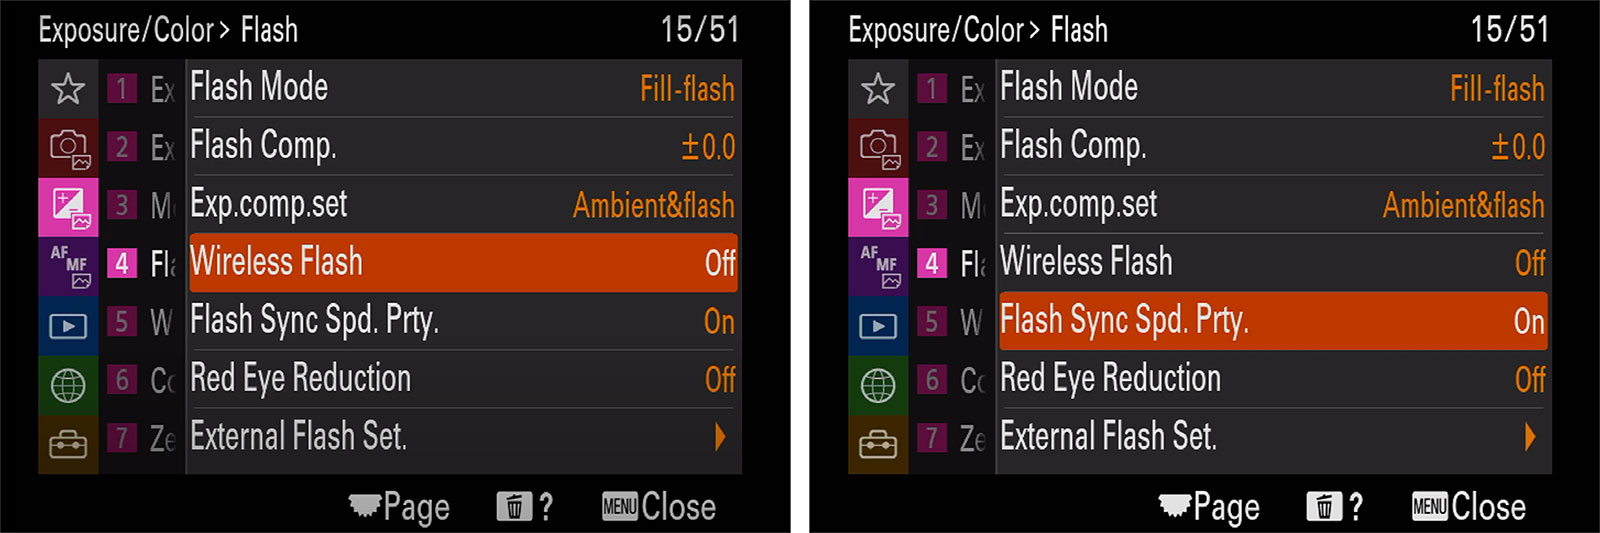 menu settings for 1/400th strobe sync with Sony a1 and Pocket Wizards